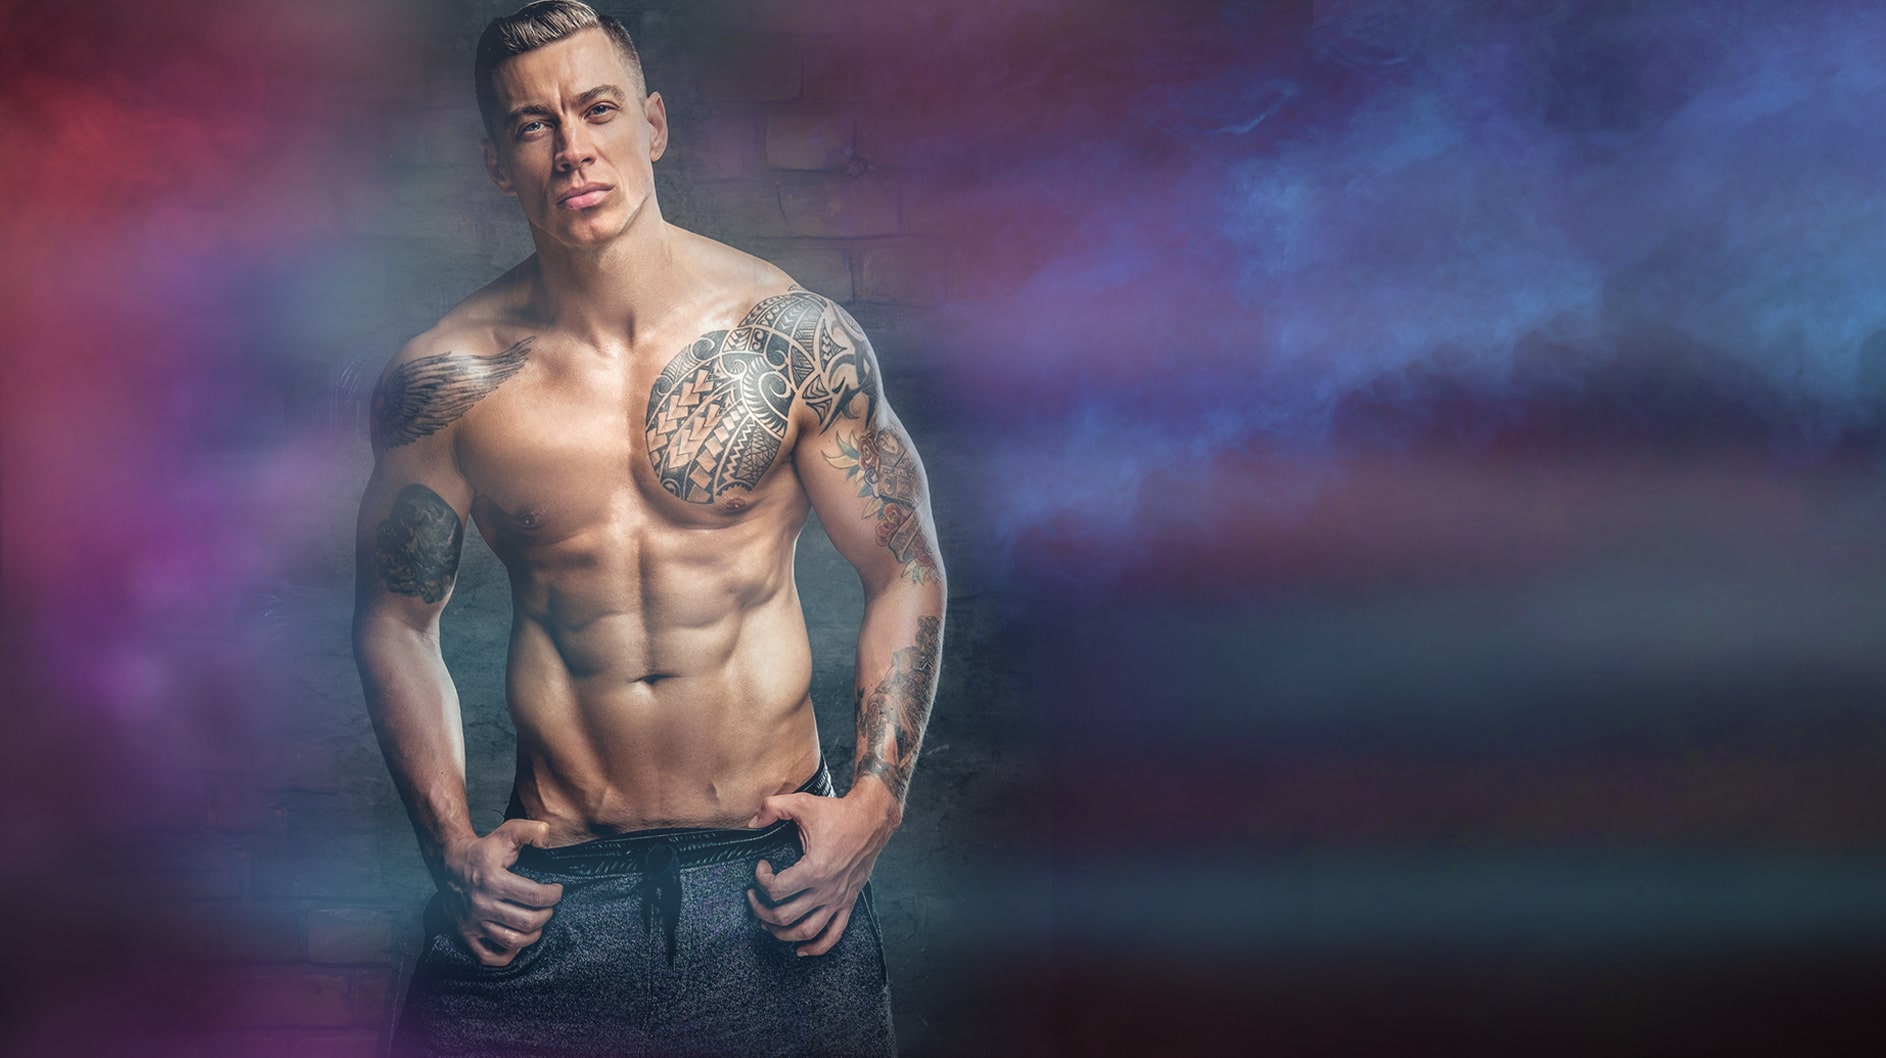 Buff tattooed male stripper posing with thumbs in pockets